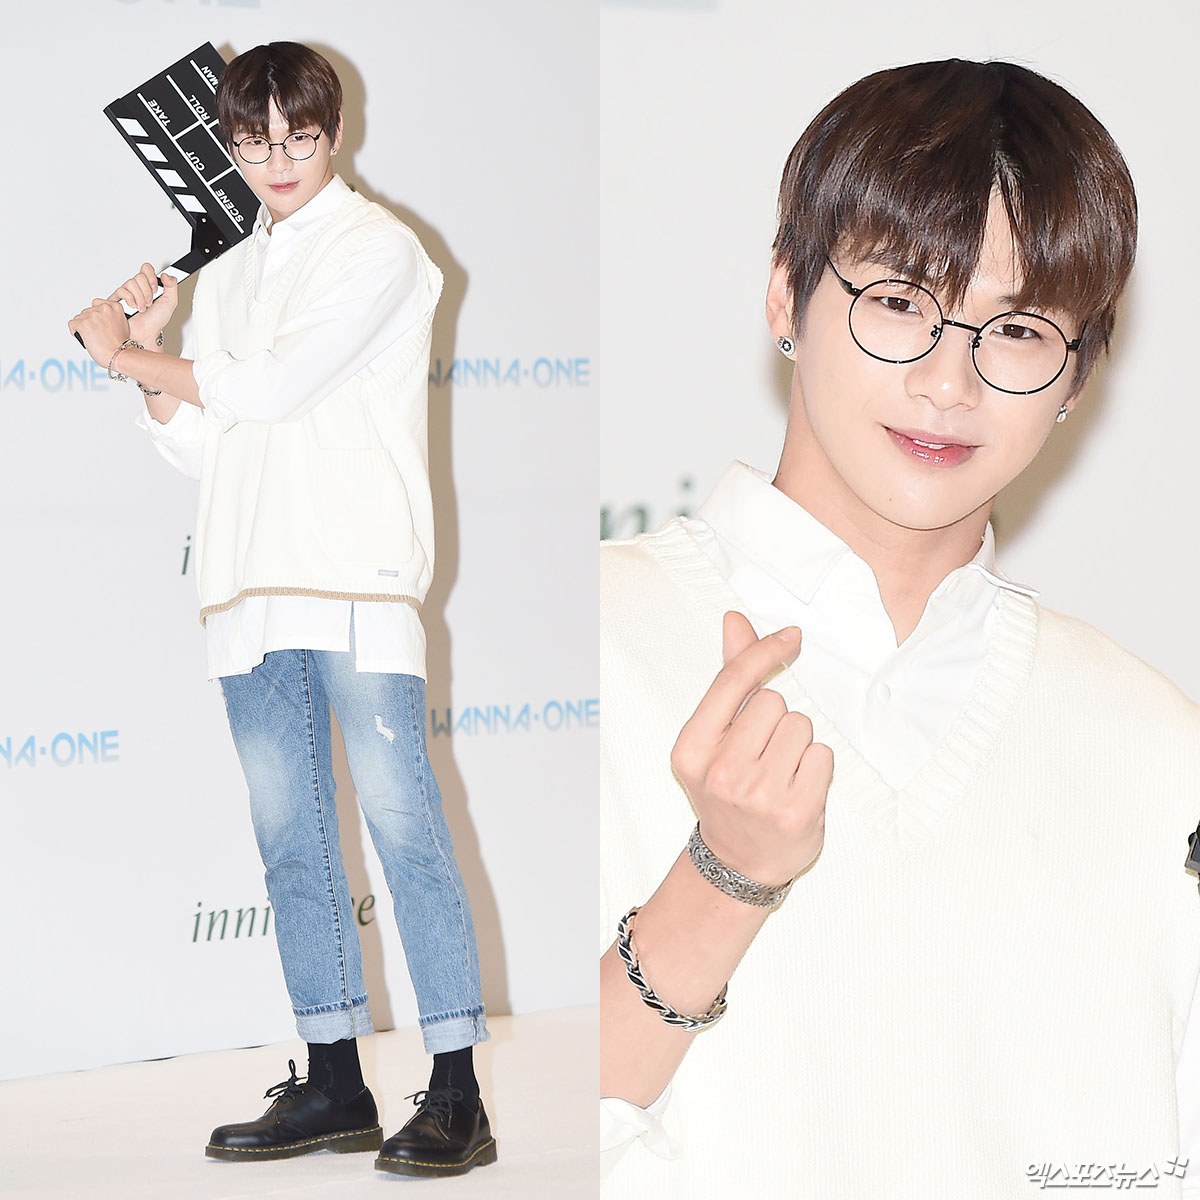 Wanna One Kang Daniel, who attended the Wanna One Fan signing event held at Innisfree headquarters in Yongsan-gu, Seoul on the afternoon of the 28th, has a photo time.  Slate like baseball bat  New white moyed  I have fallen into baseball these days  I have all the eyes   Support Heart  Call me the city and Club Universitario de Deportes.